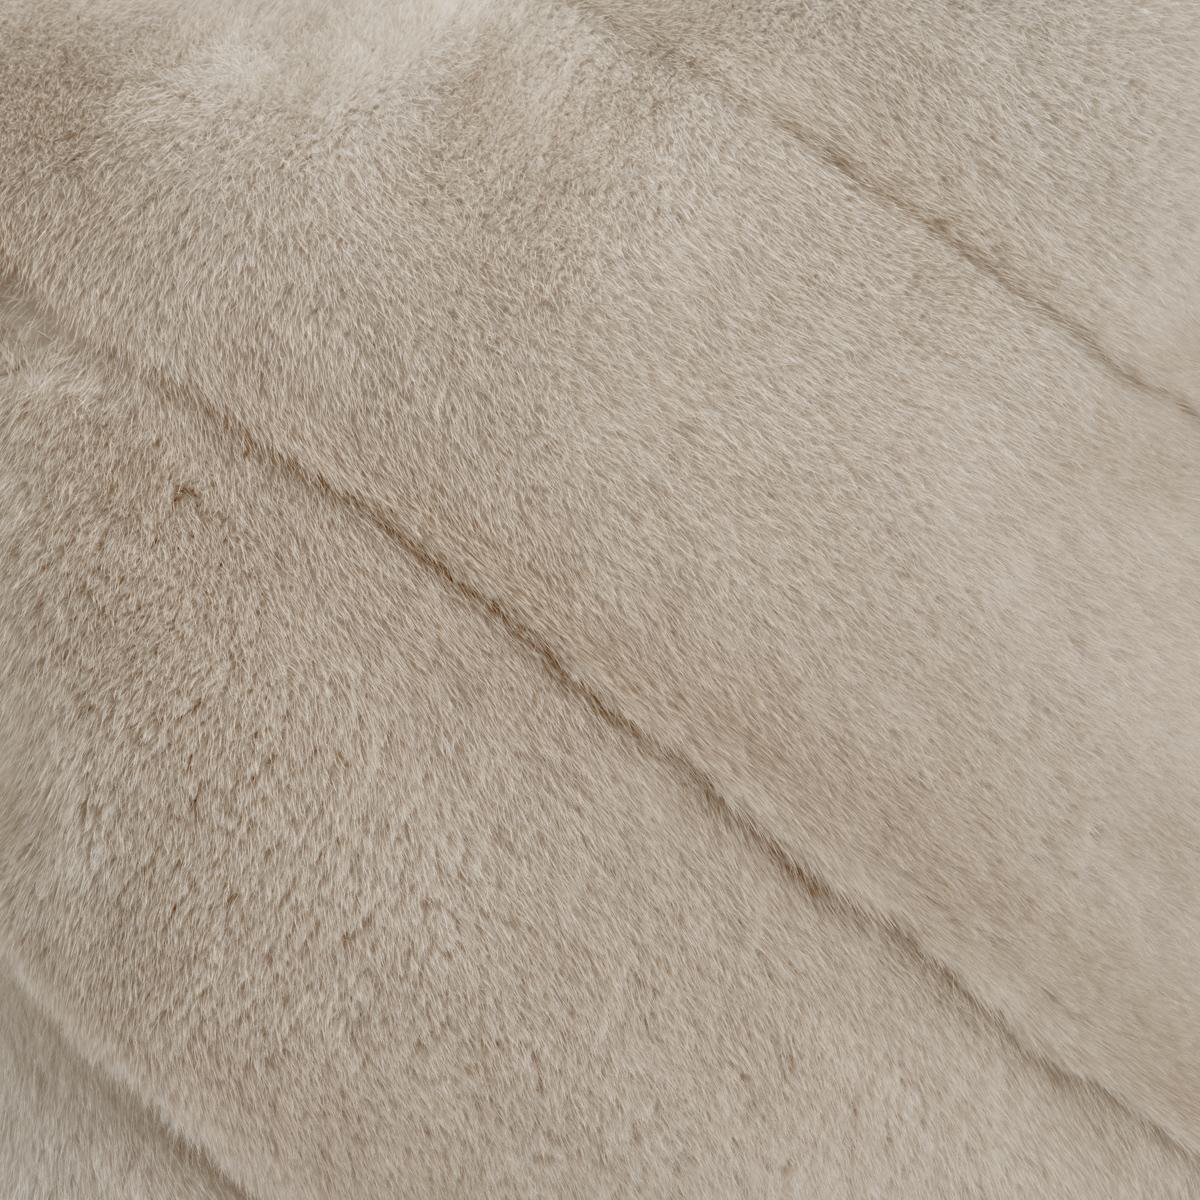 Back to Side Natural Pearl Beige Mink Fur Pillow Cushion by Muchi Decor Neuf - En vente à Poviglio, IT